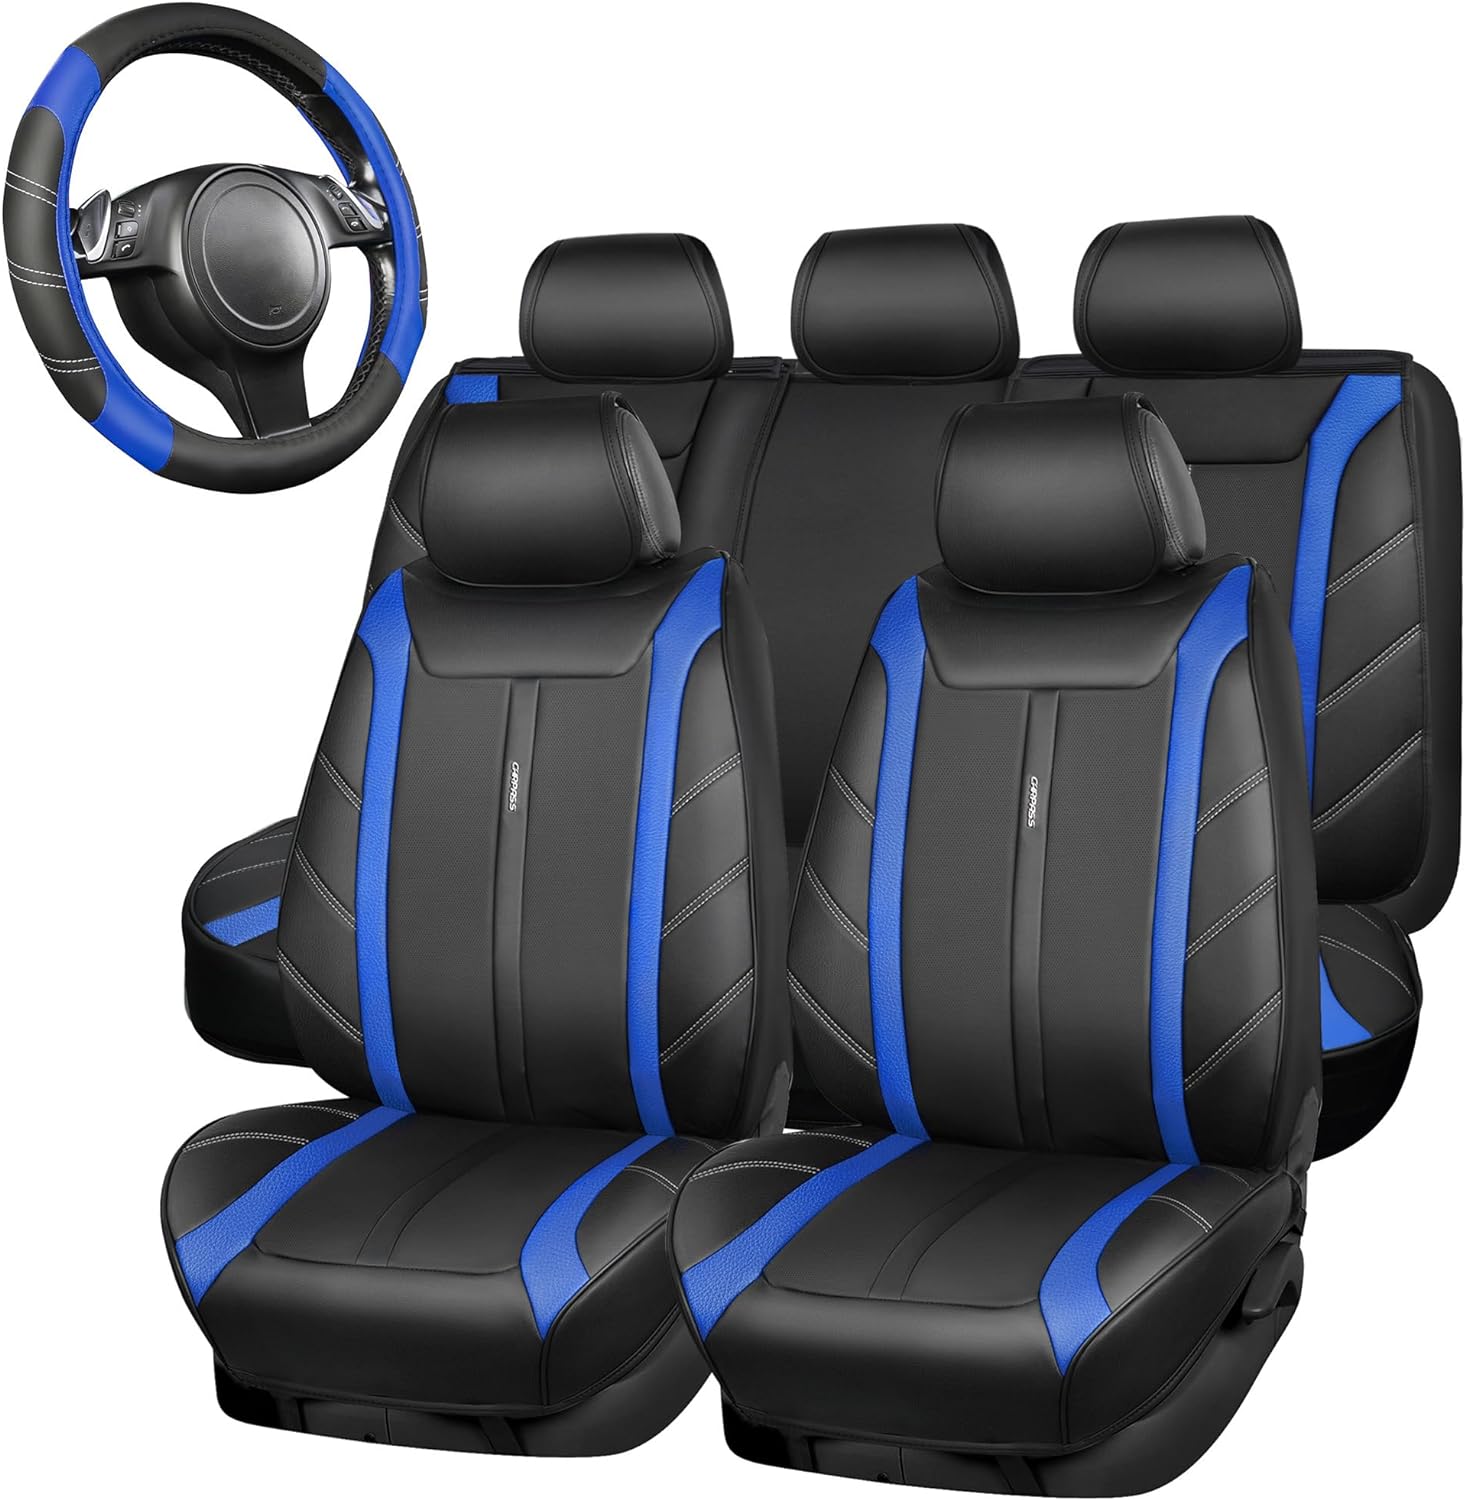 CAR PASS Line Rider Microfiber Leather Sporty 14.5-15inch Steering Wheel Cover and 5 Seats Luxury Leather Seat Covers Full Set Fit for Most Vehicle Sedan Van SUV Cars(Black-Blue)